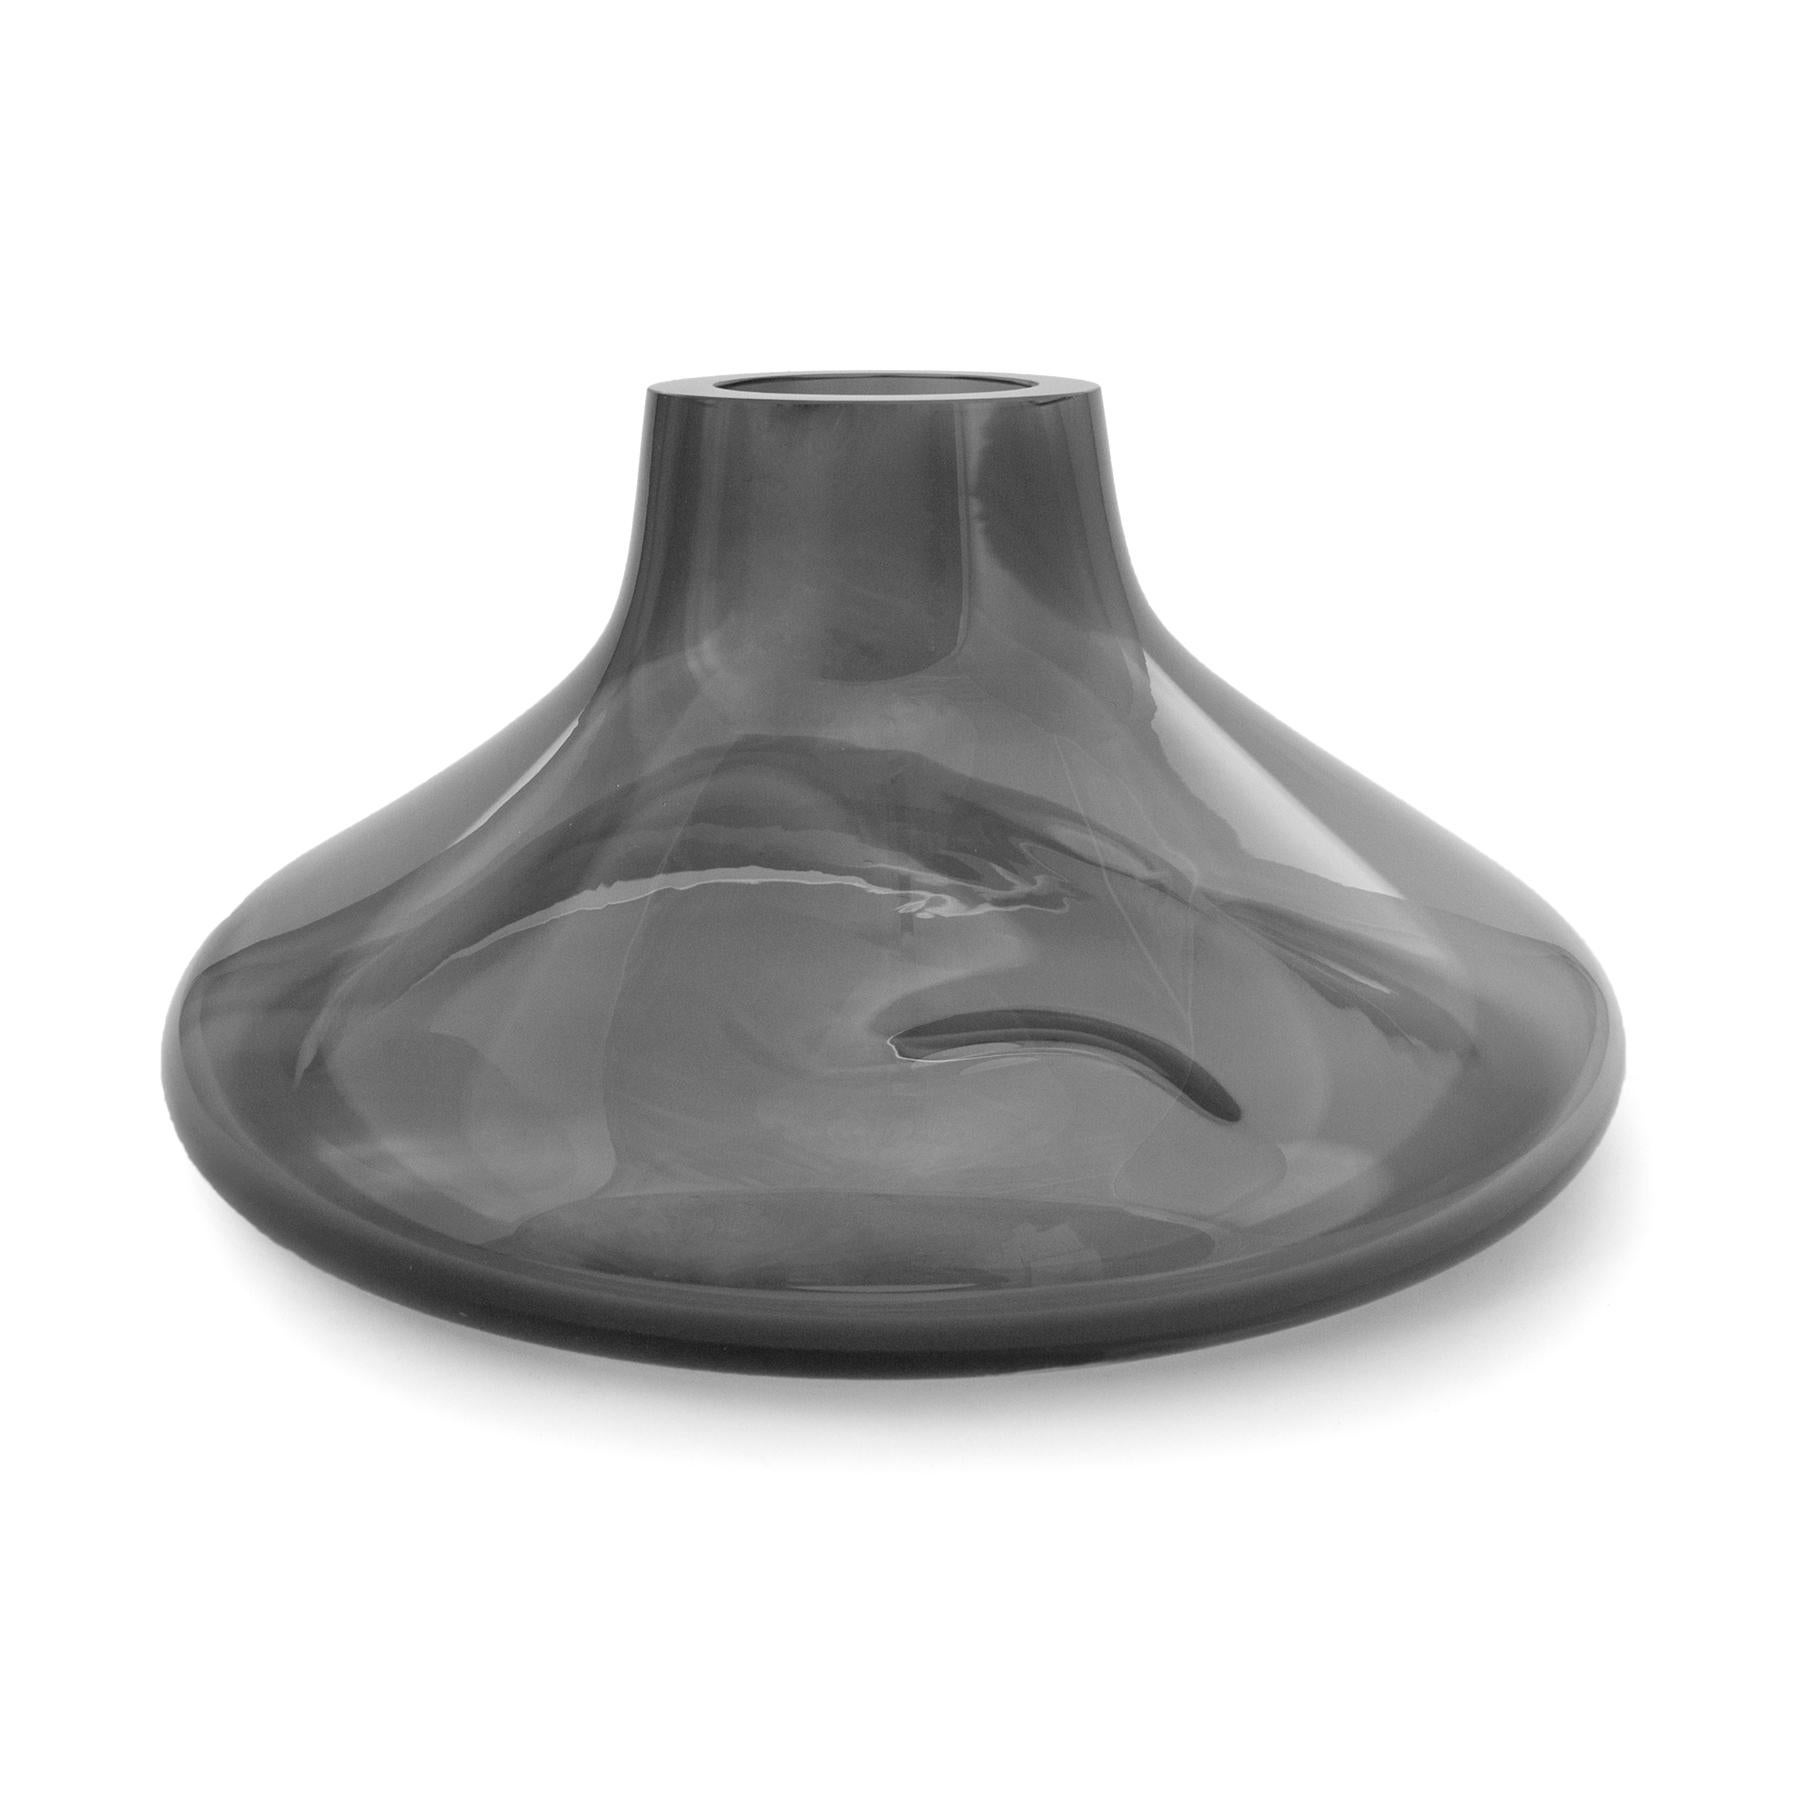 Makemake Silver Smoke L Vase + Bowl by ELOA
Material: Glass
Dimensions: D40 x W40 x H25 cm
Also Available in different colours and dimensions.

Makemake is reminiscent of Jupiter‘s ring. The object was designed with a double functionality and